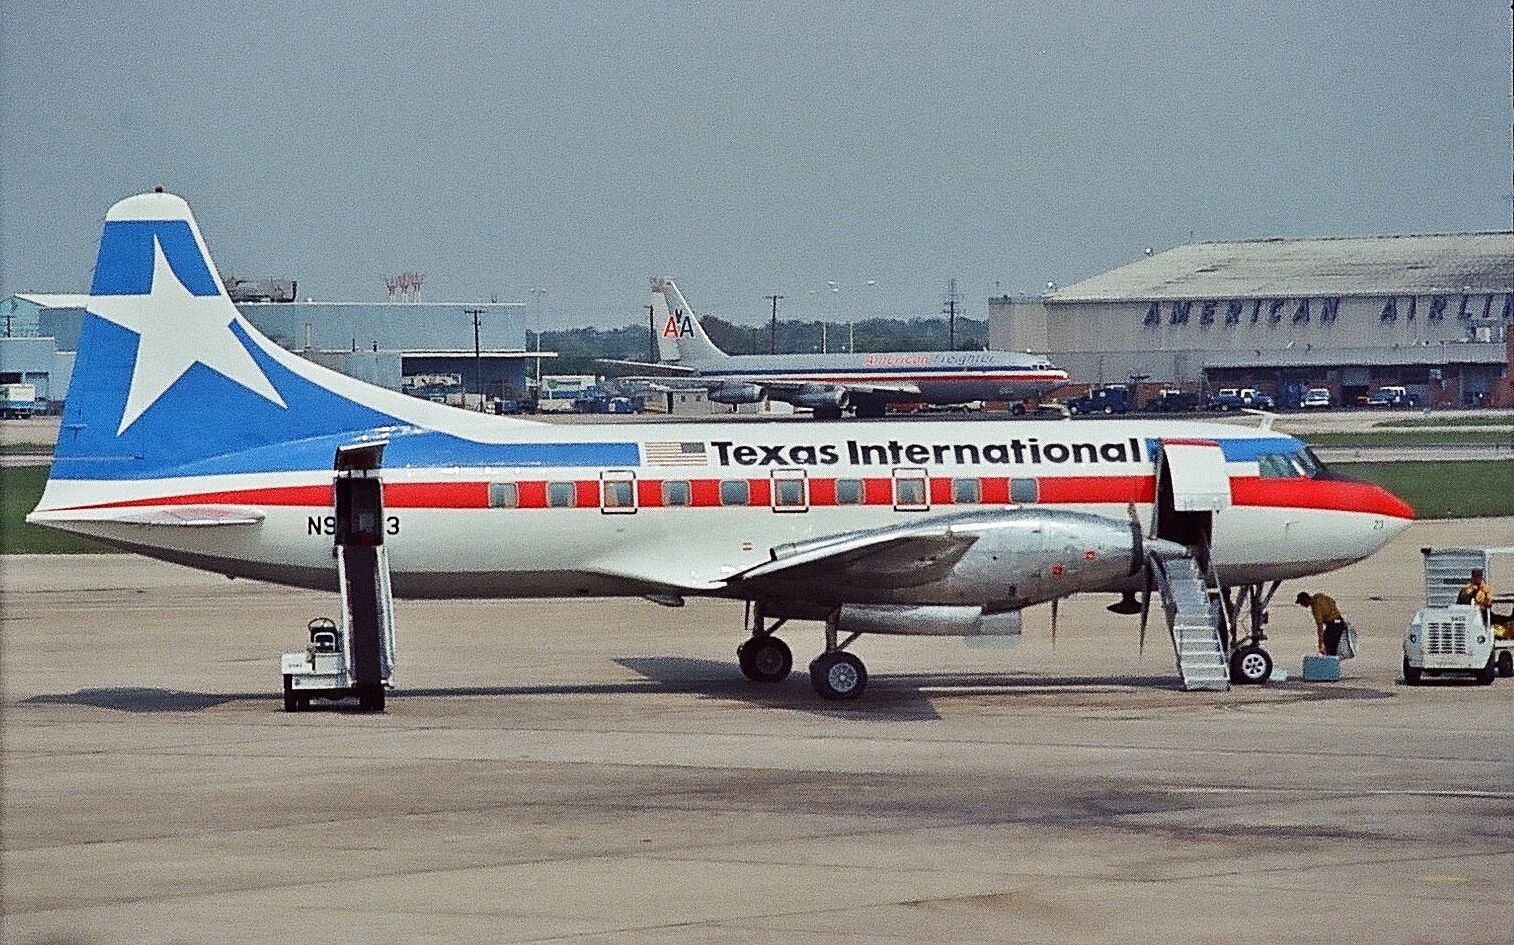 A Texas International Airlines Convair 600 Parked On An Airport Apron.